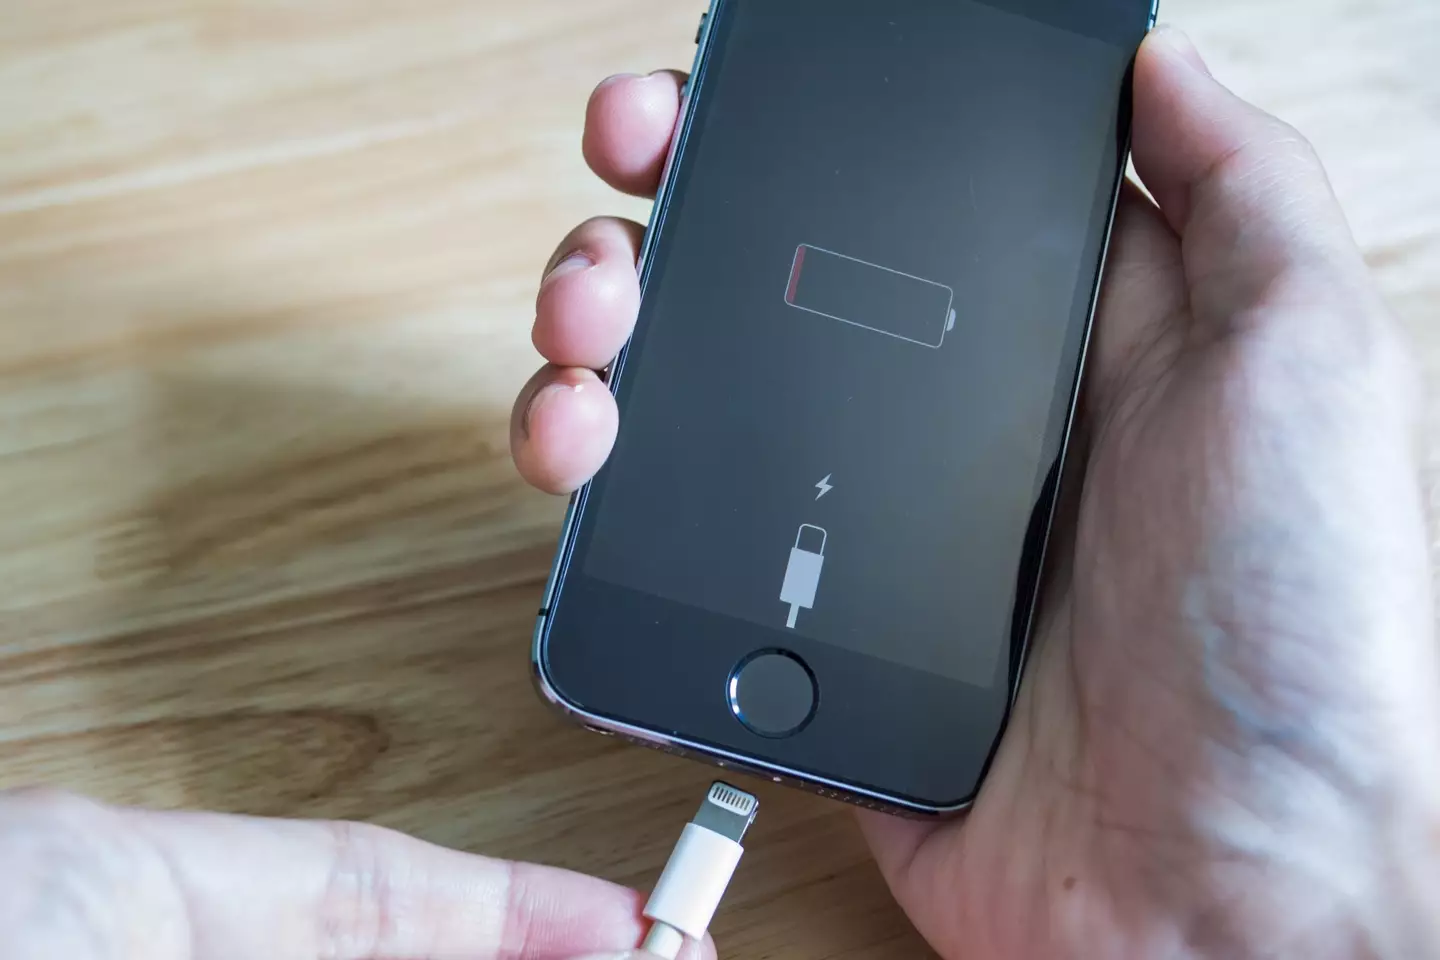 Apple admitted that if a consumer had an older battery in their phone then the performance speed would be affected.